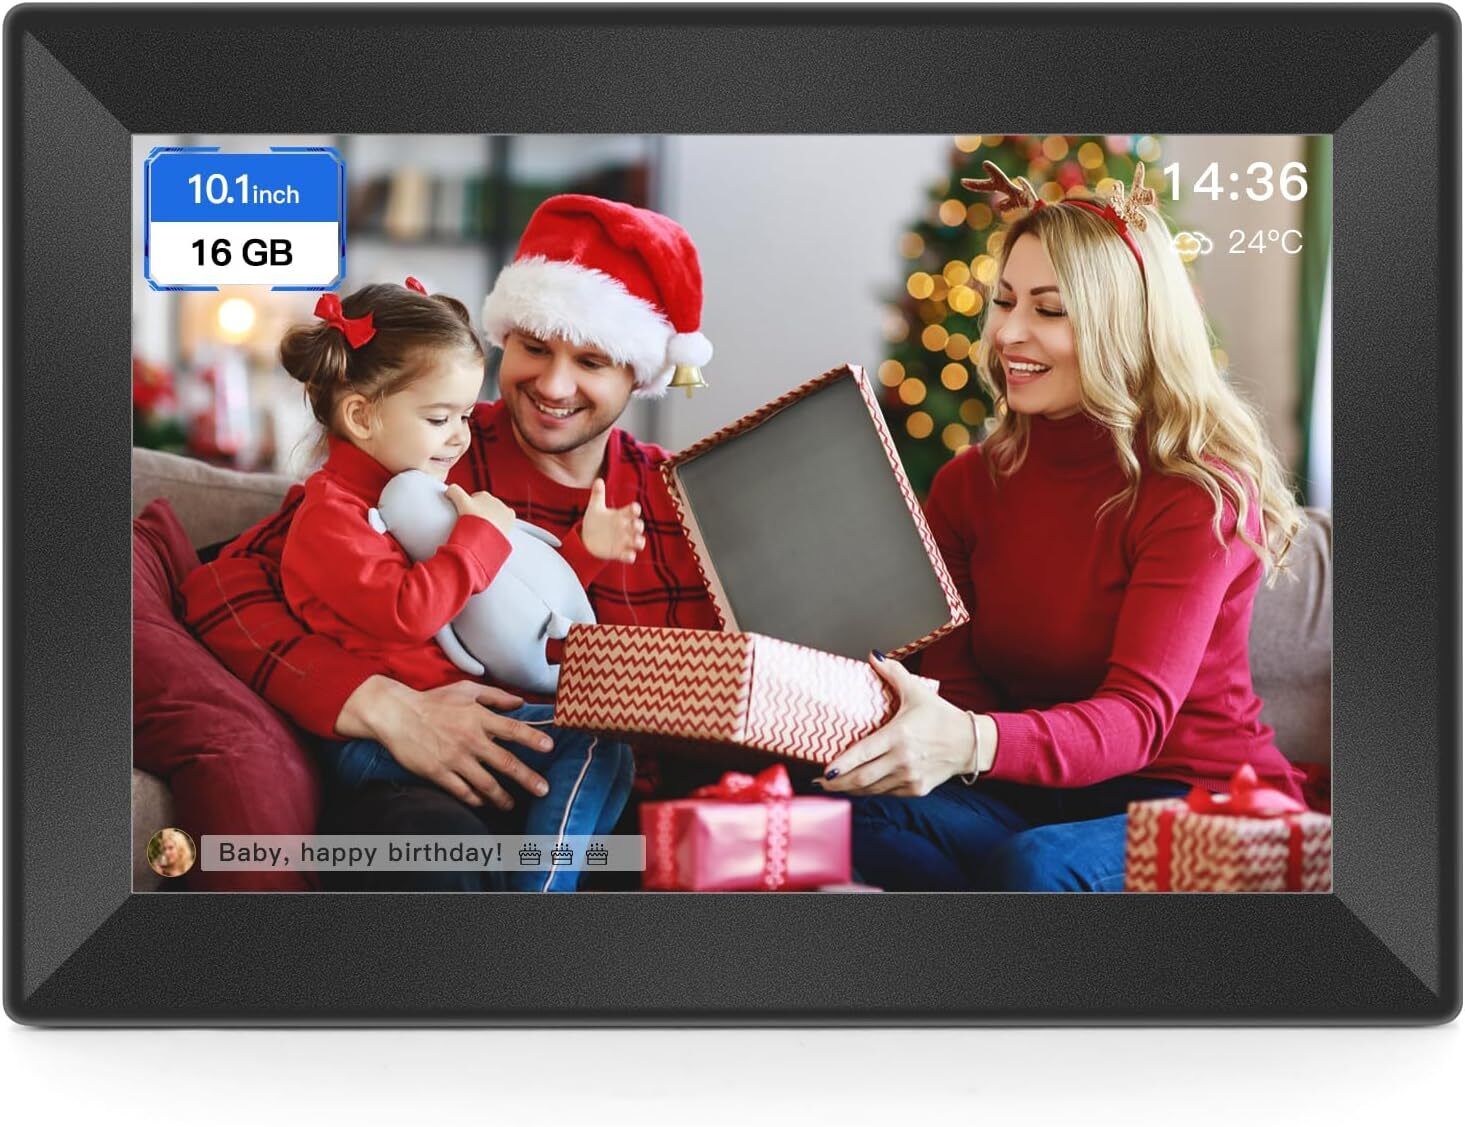 10.1Inch HD Digital Picture Frame WiFi Touch Screen Smart 10.1 Inch, black 